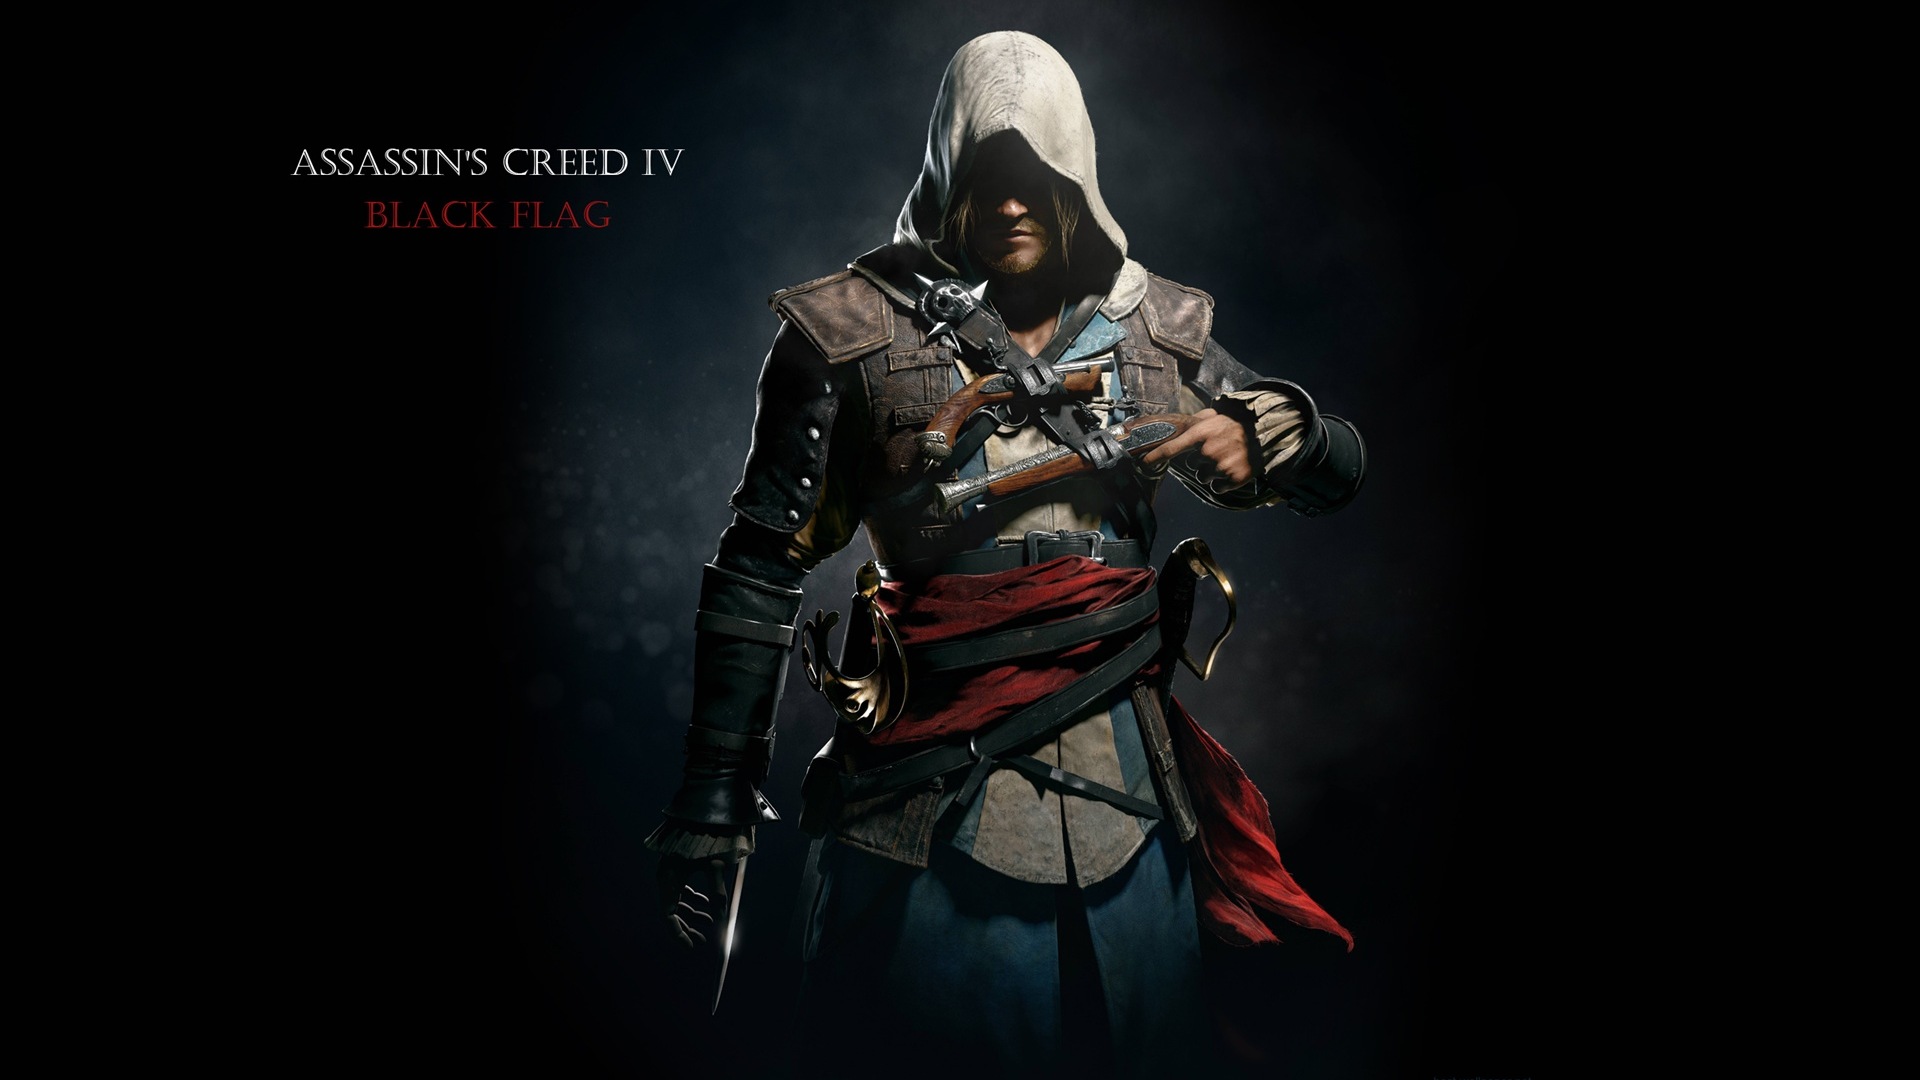 Assassin's Creed IV: Black Flag HD wallpapers #9 - 1920x1080